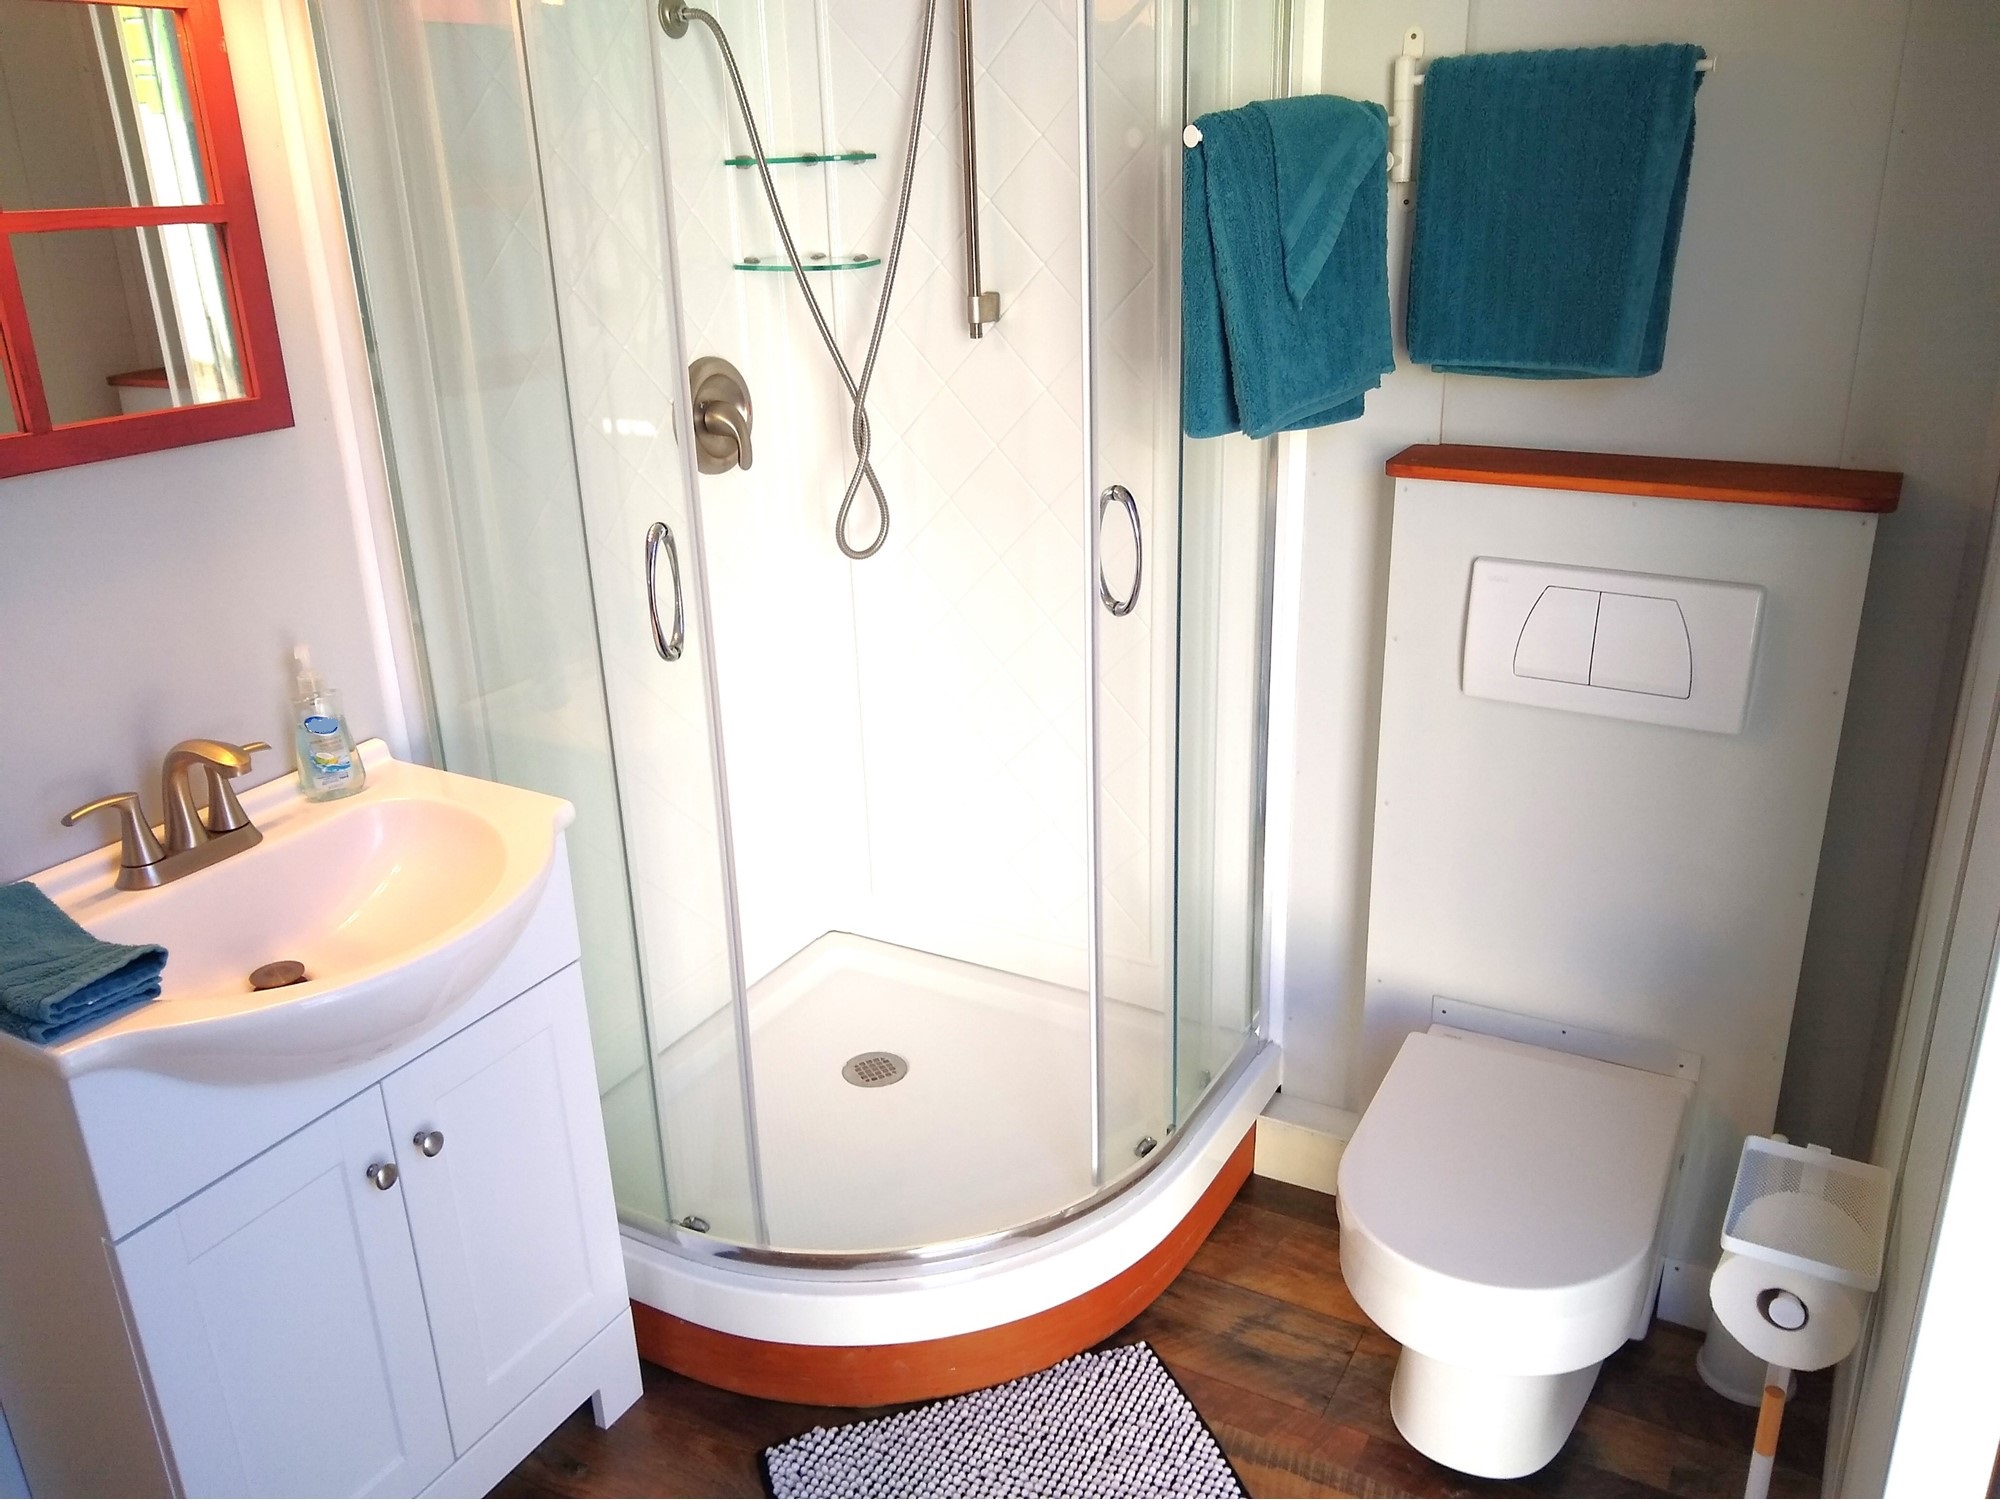 An over-sized bathroom with outdoor access